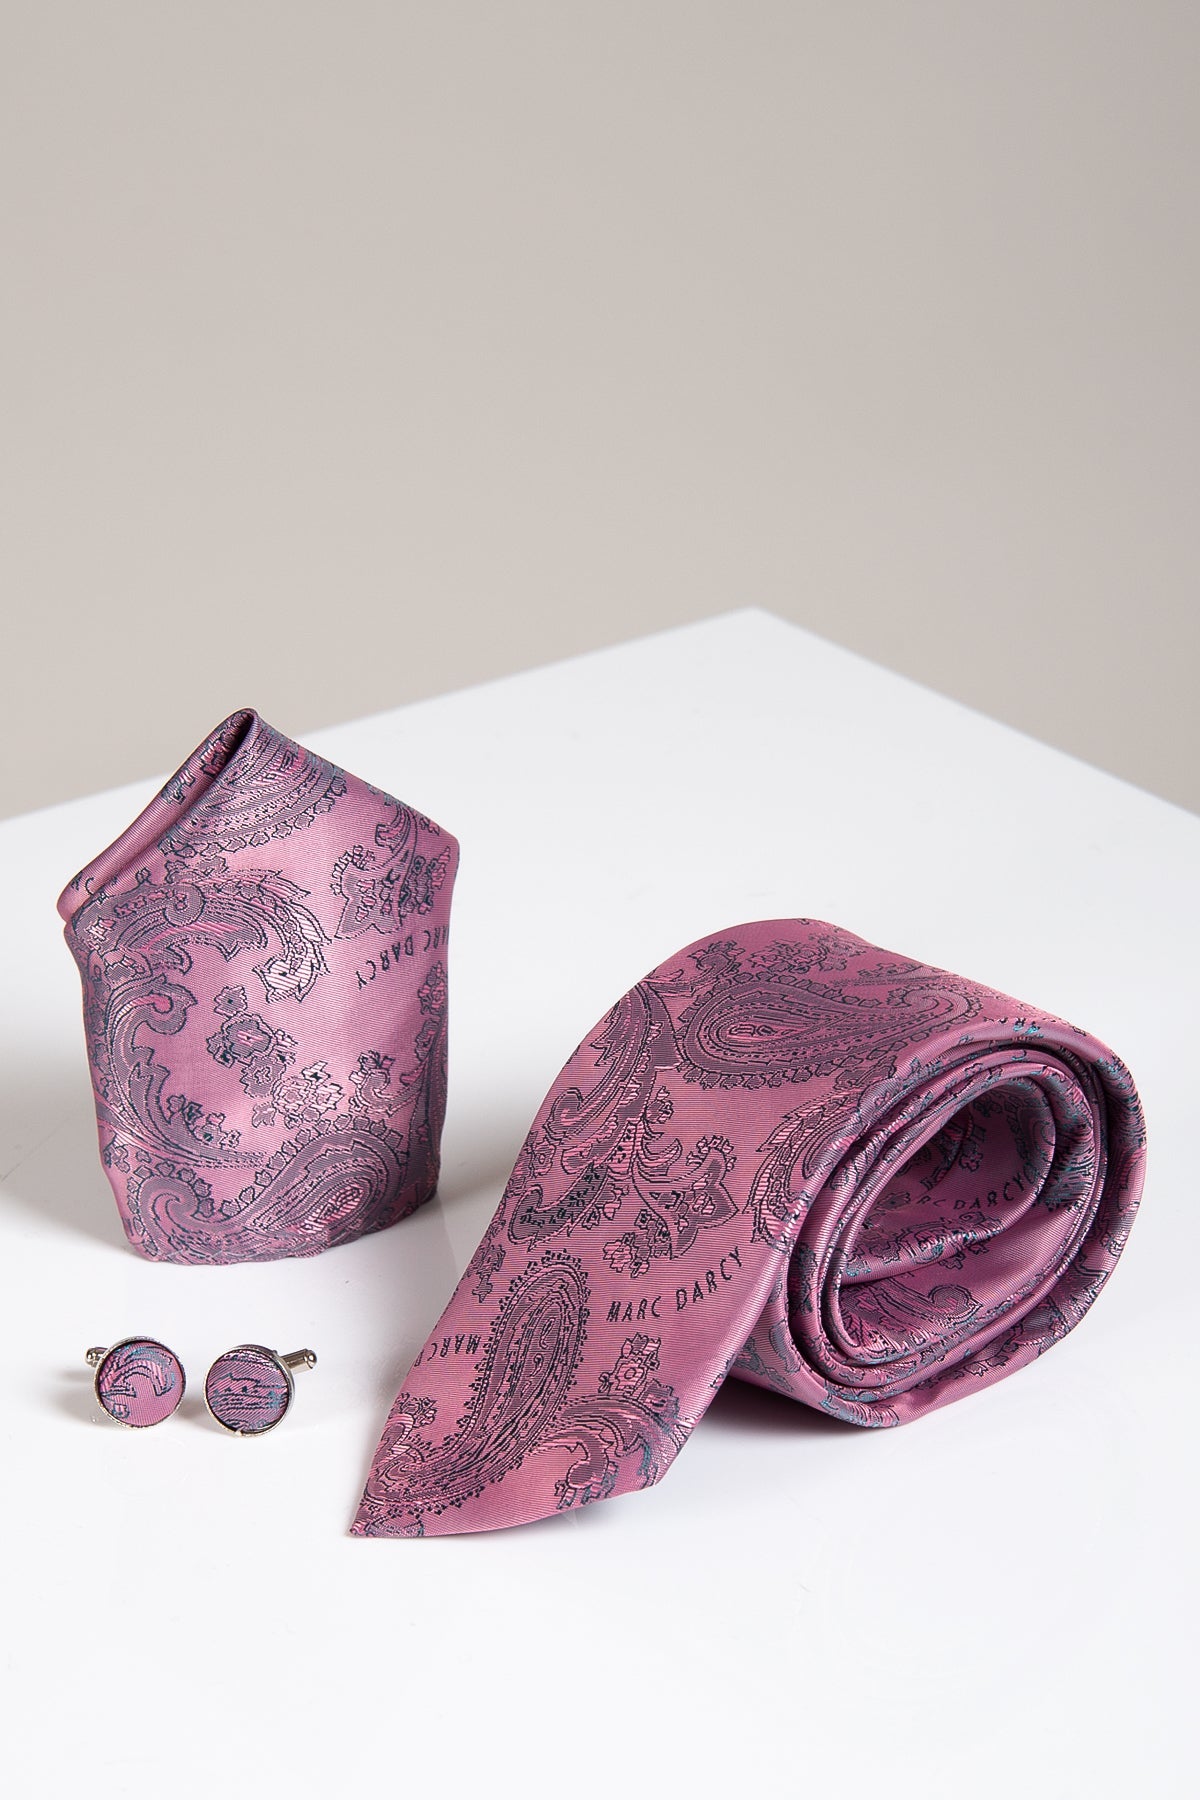 MD PAISLEY - Baby Pink Paisley Tie, Cufflink and Pocket Square Set